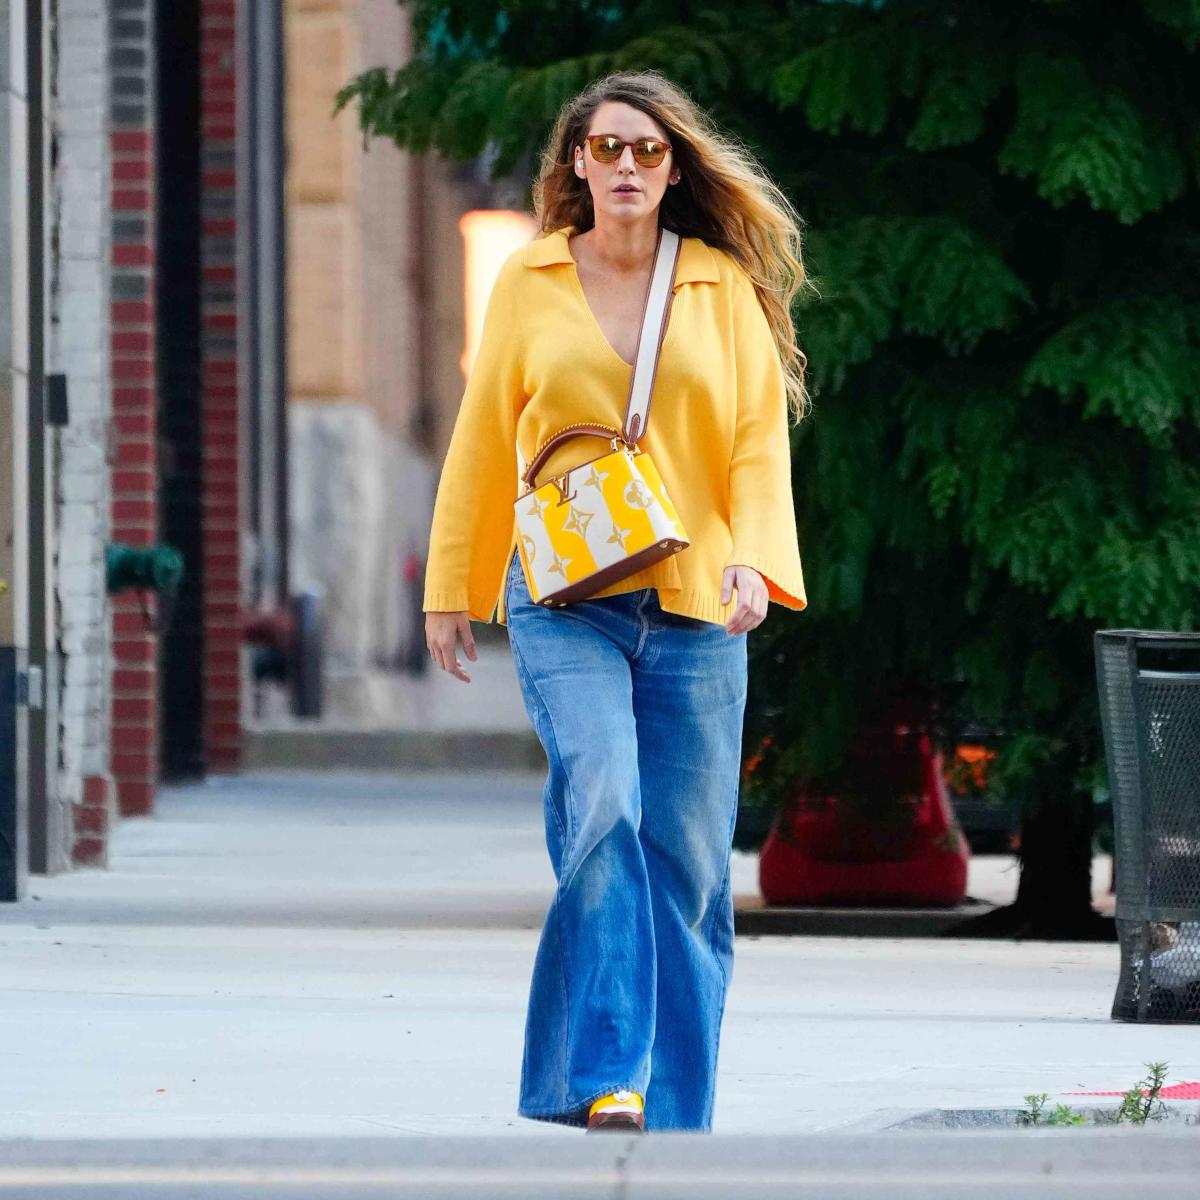 Blake Lively Rocks a Yellow Polo Sweater — Get the Look